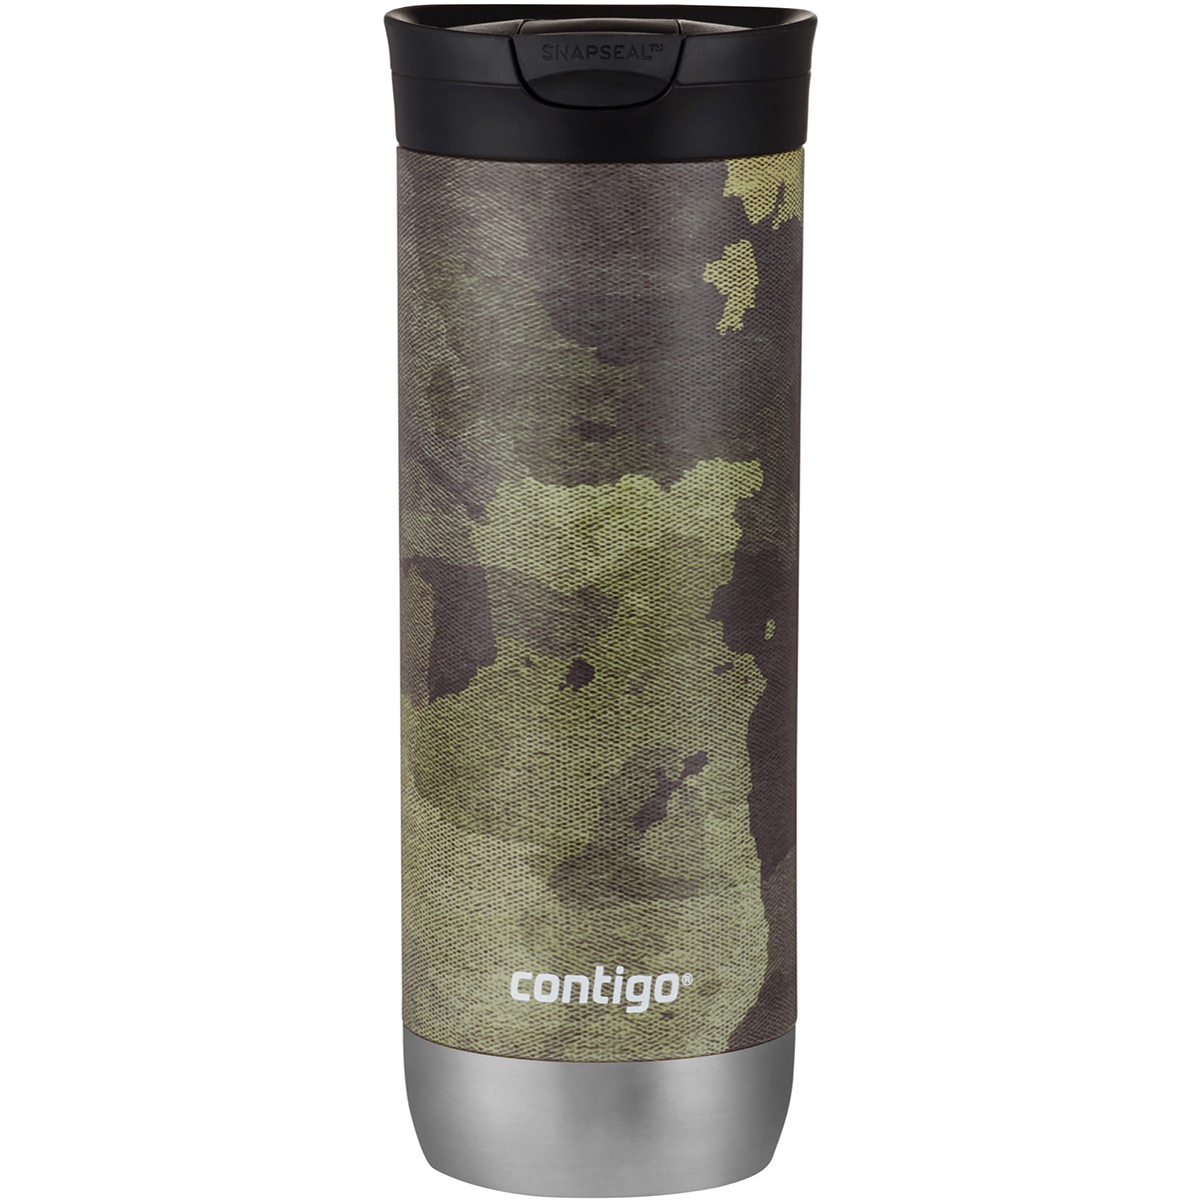 Contigo Couture Stainless Steel Travel Mug with SNAPSEAL Lid Camouflage, 20 fl oz. - image 1 of 2